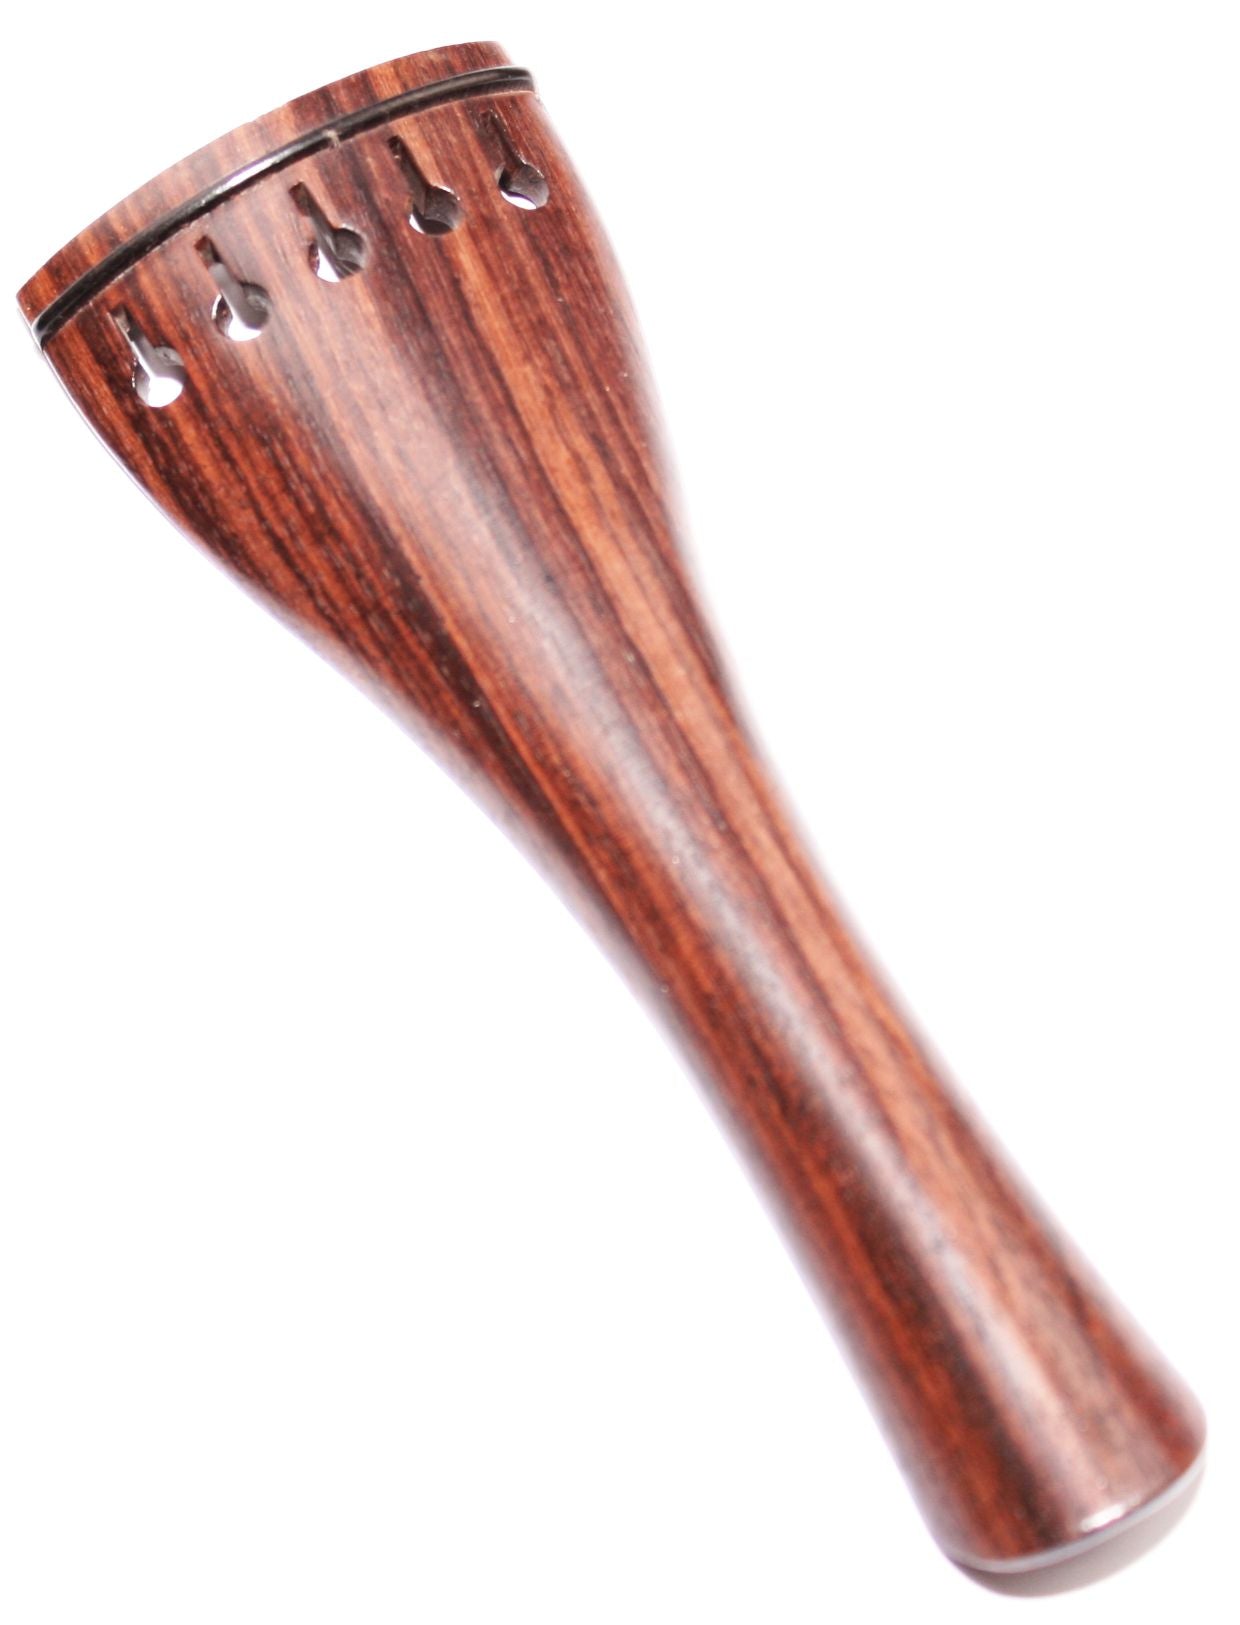 Viola tailpiece-Round-Rosewood-5 strings-145mm